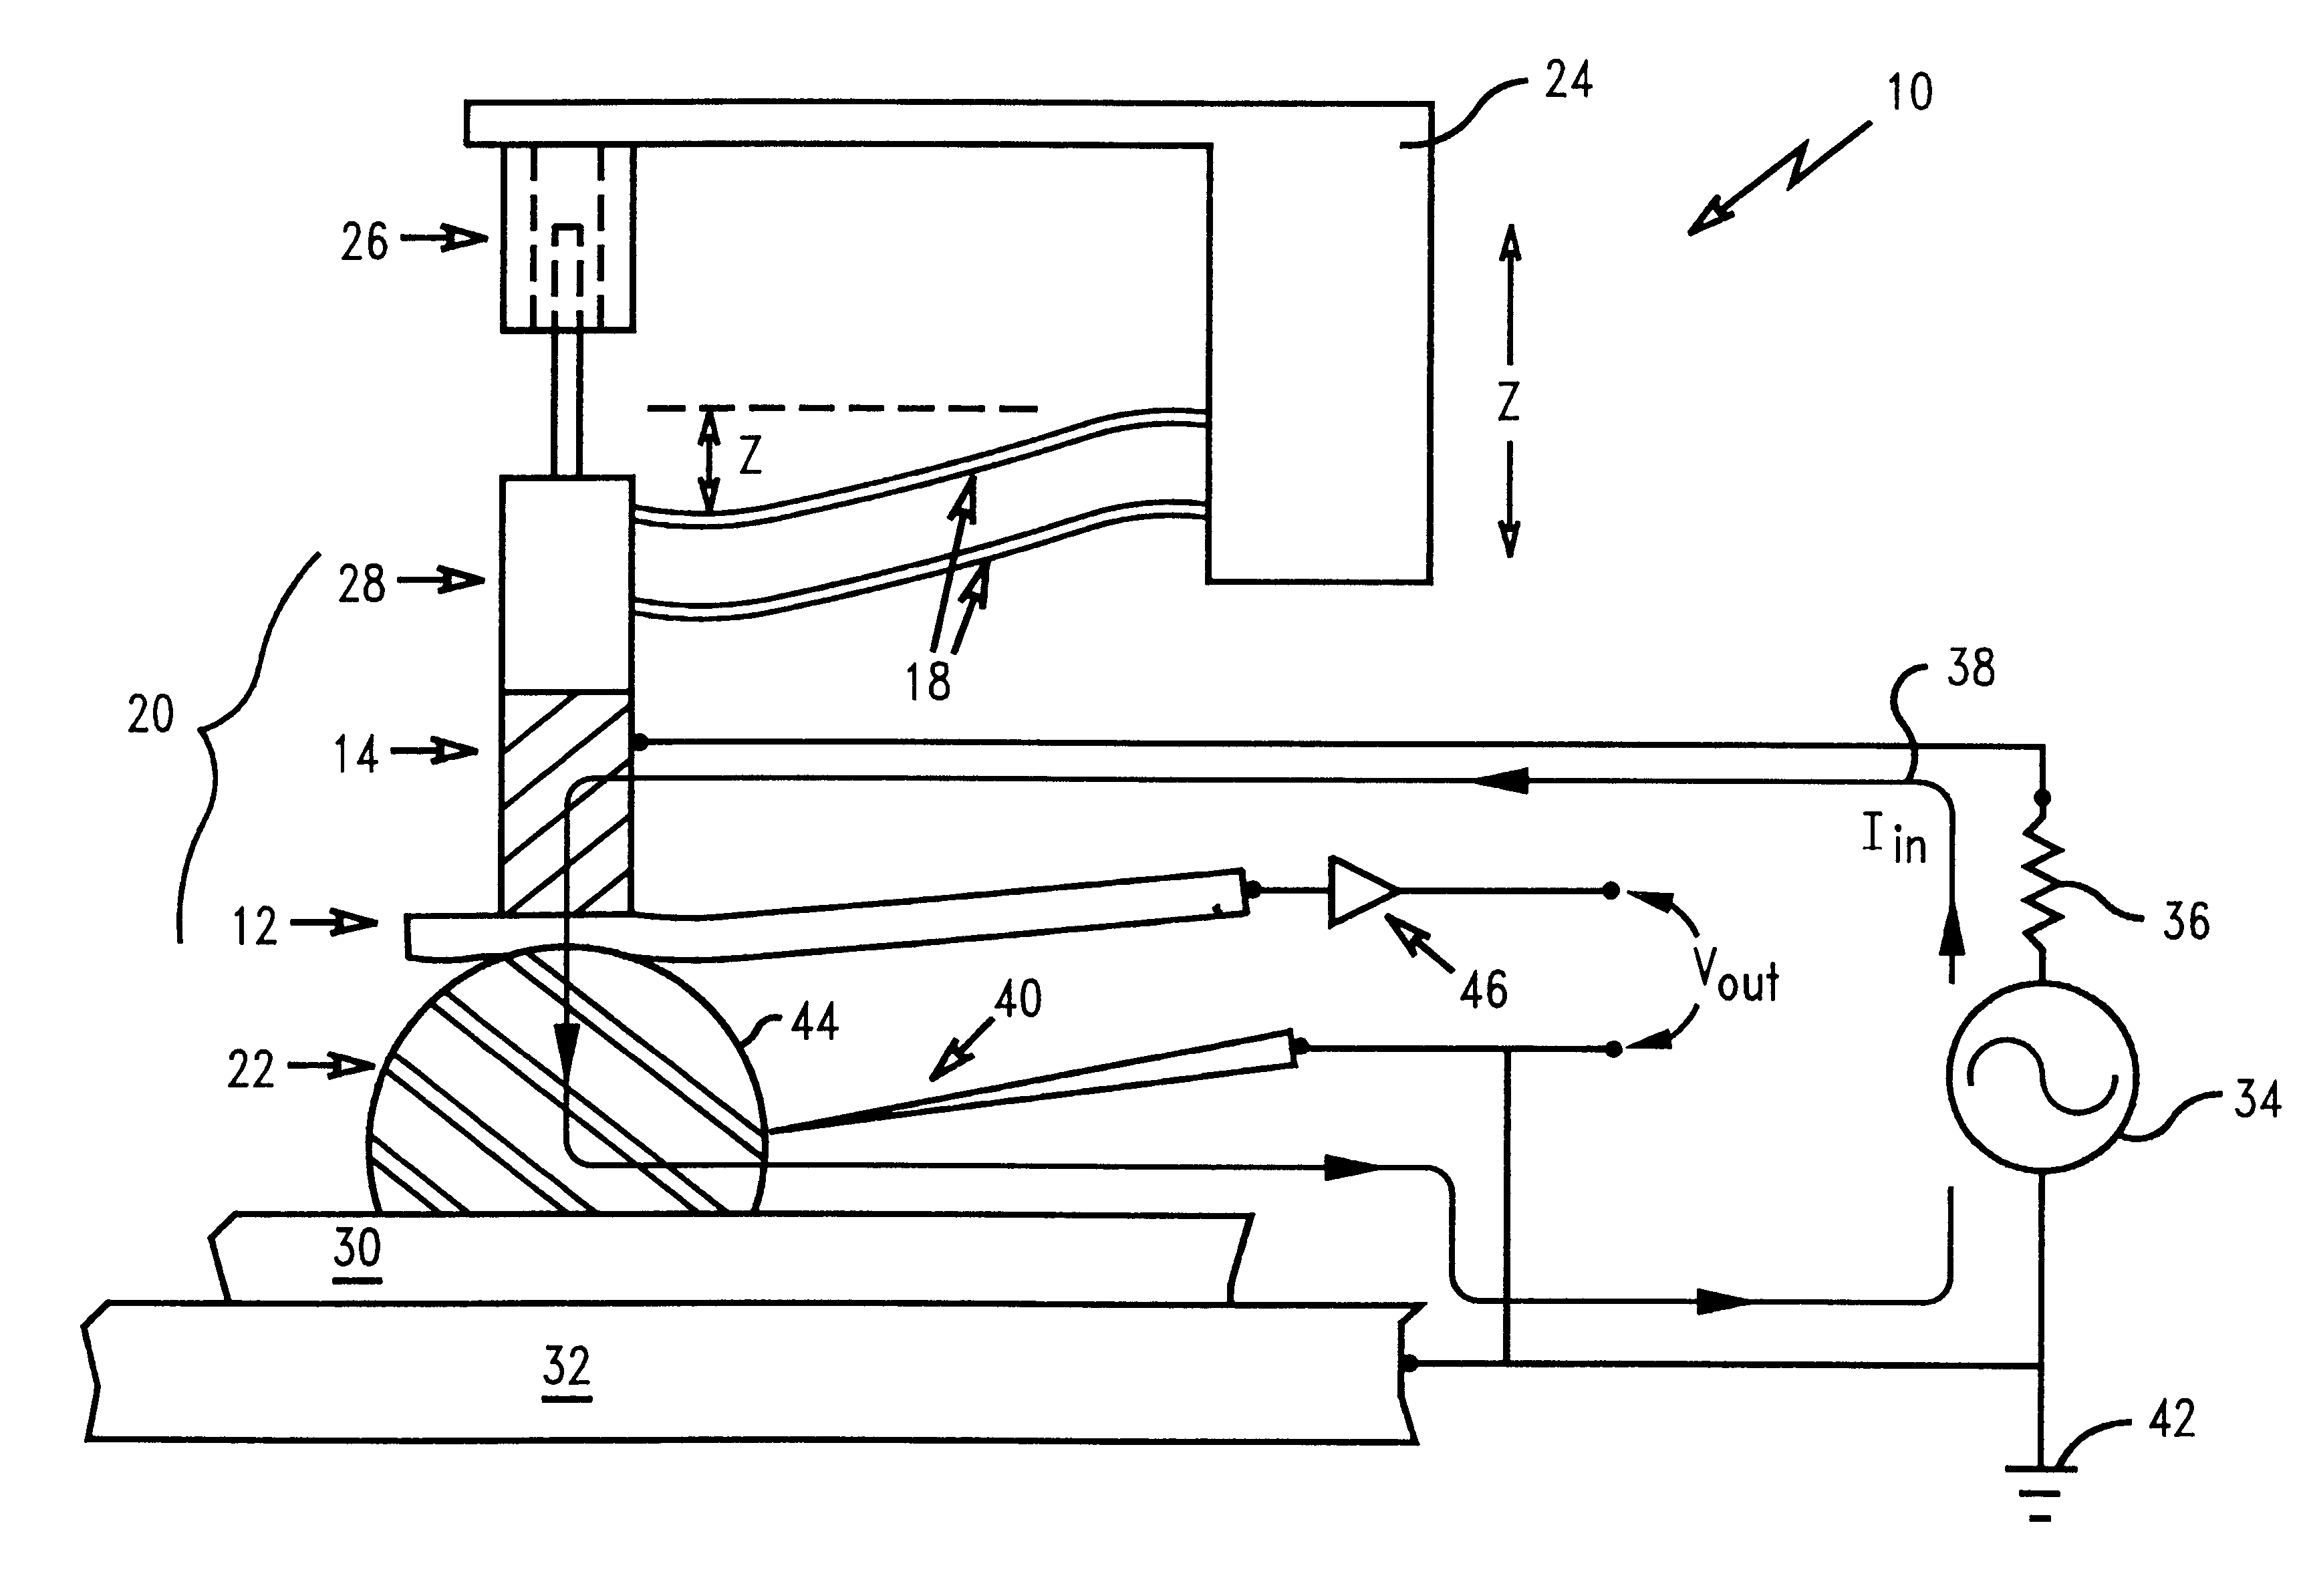 Method of measuring oxide thickness during semiconductor fabrication